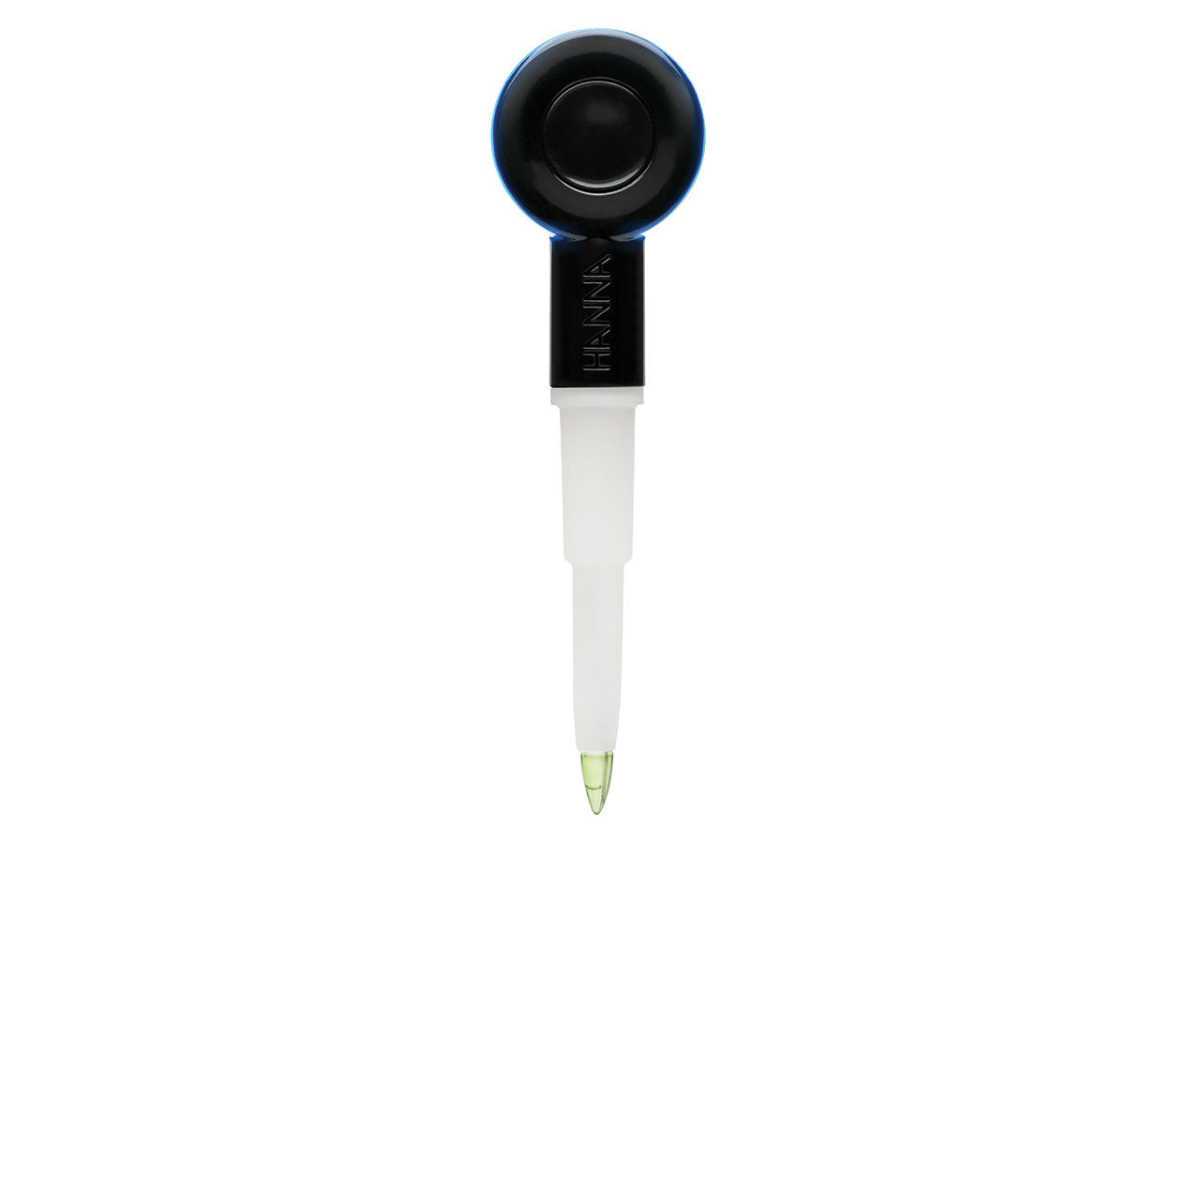 FC2022 Halo Bluetooth pH electrode for soil analysis